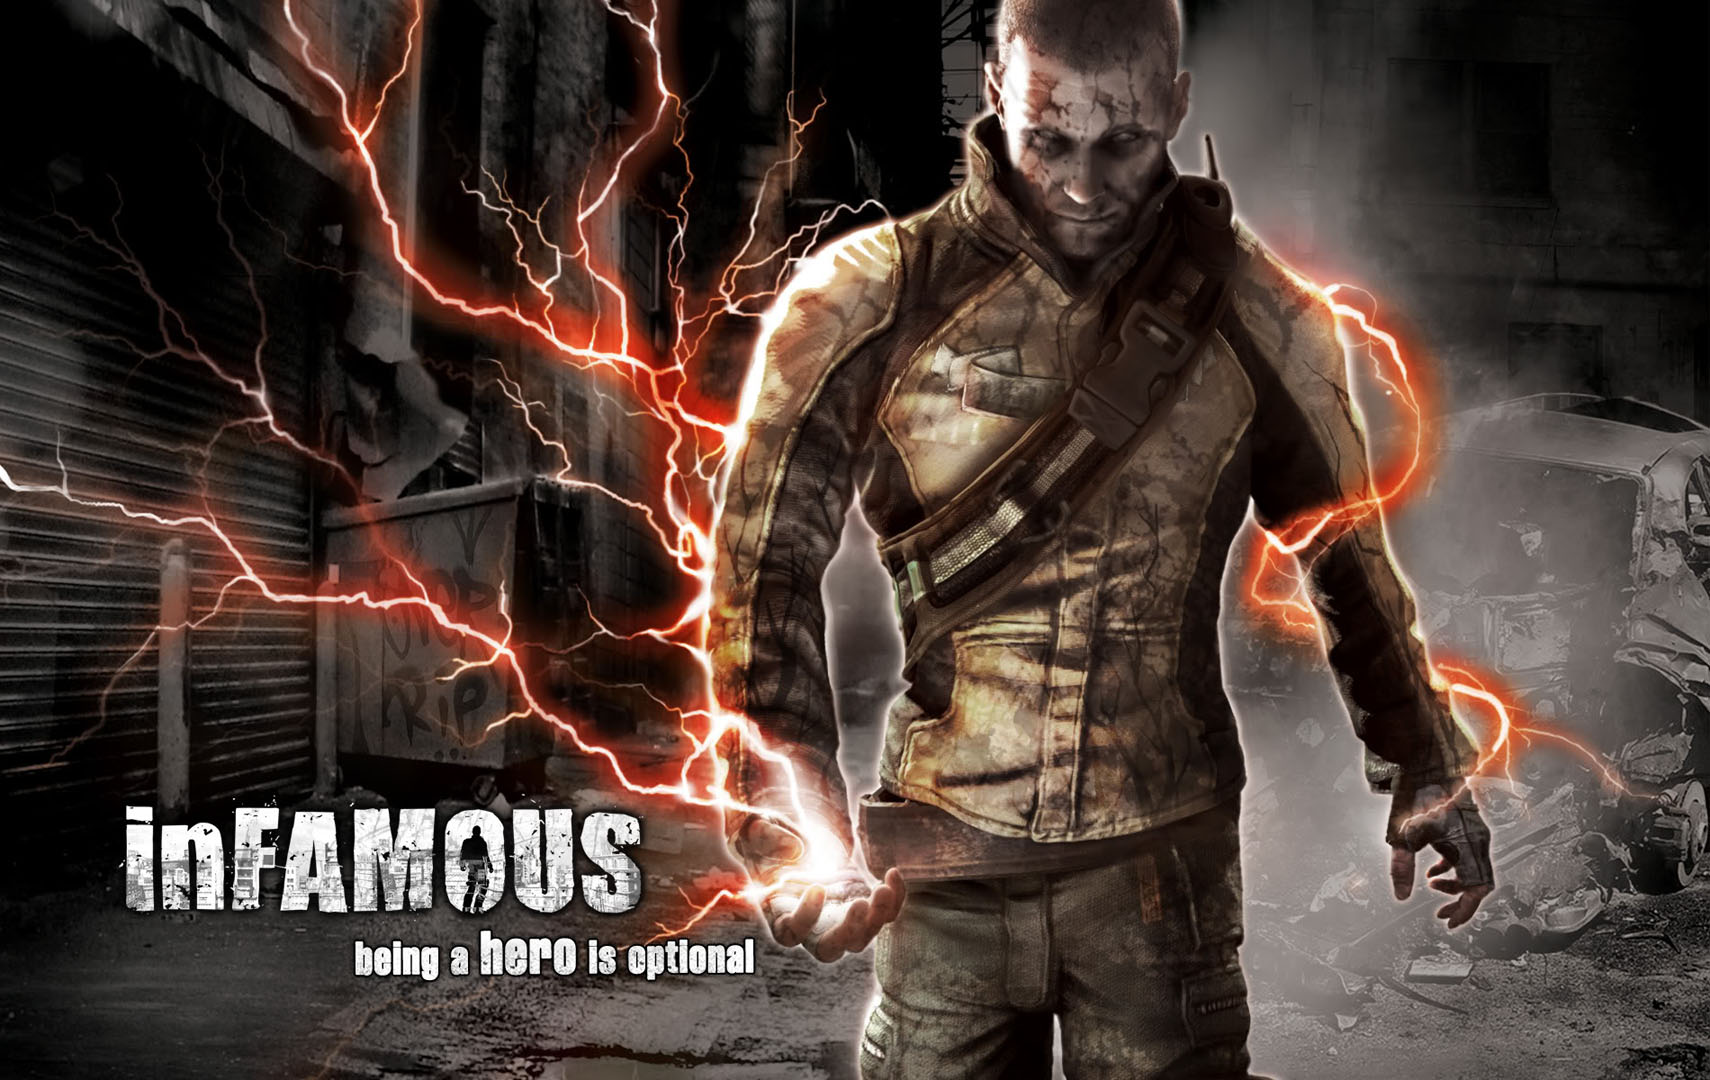 Evil Action Rpg Games Wallpaper Image Featuring Infamous